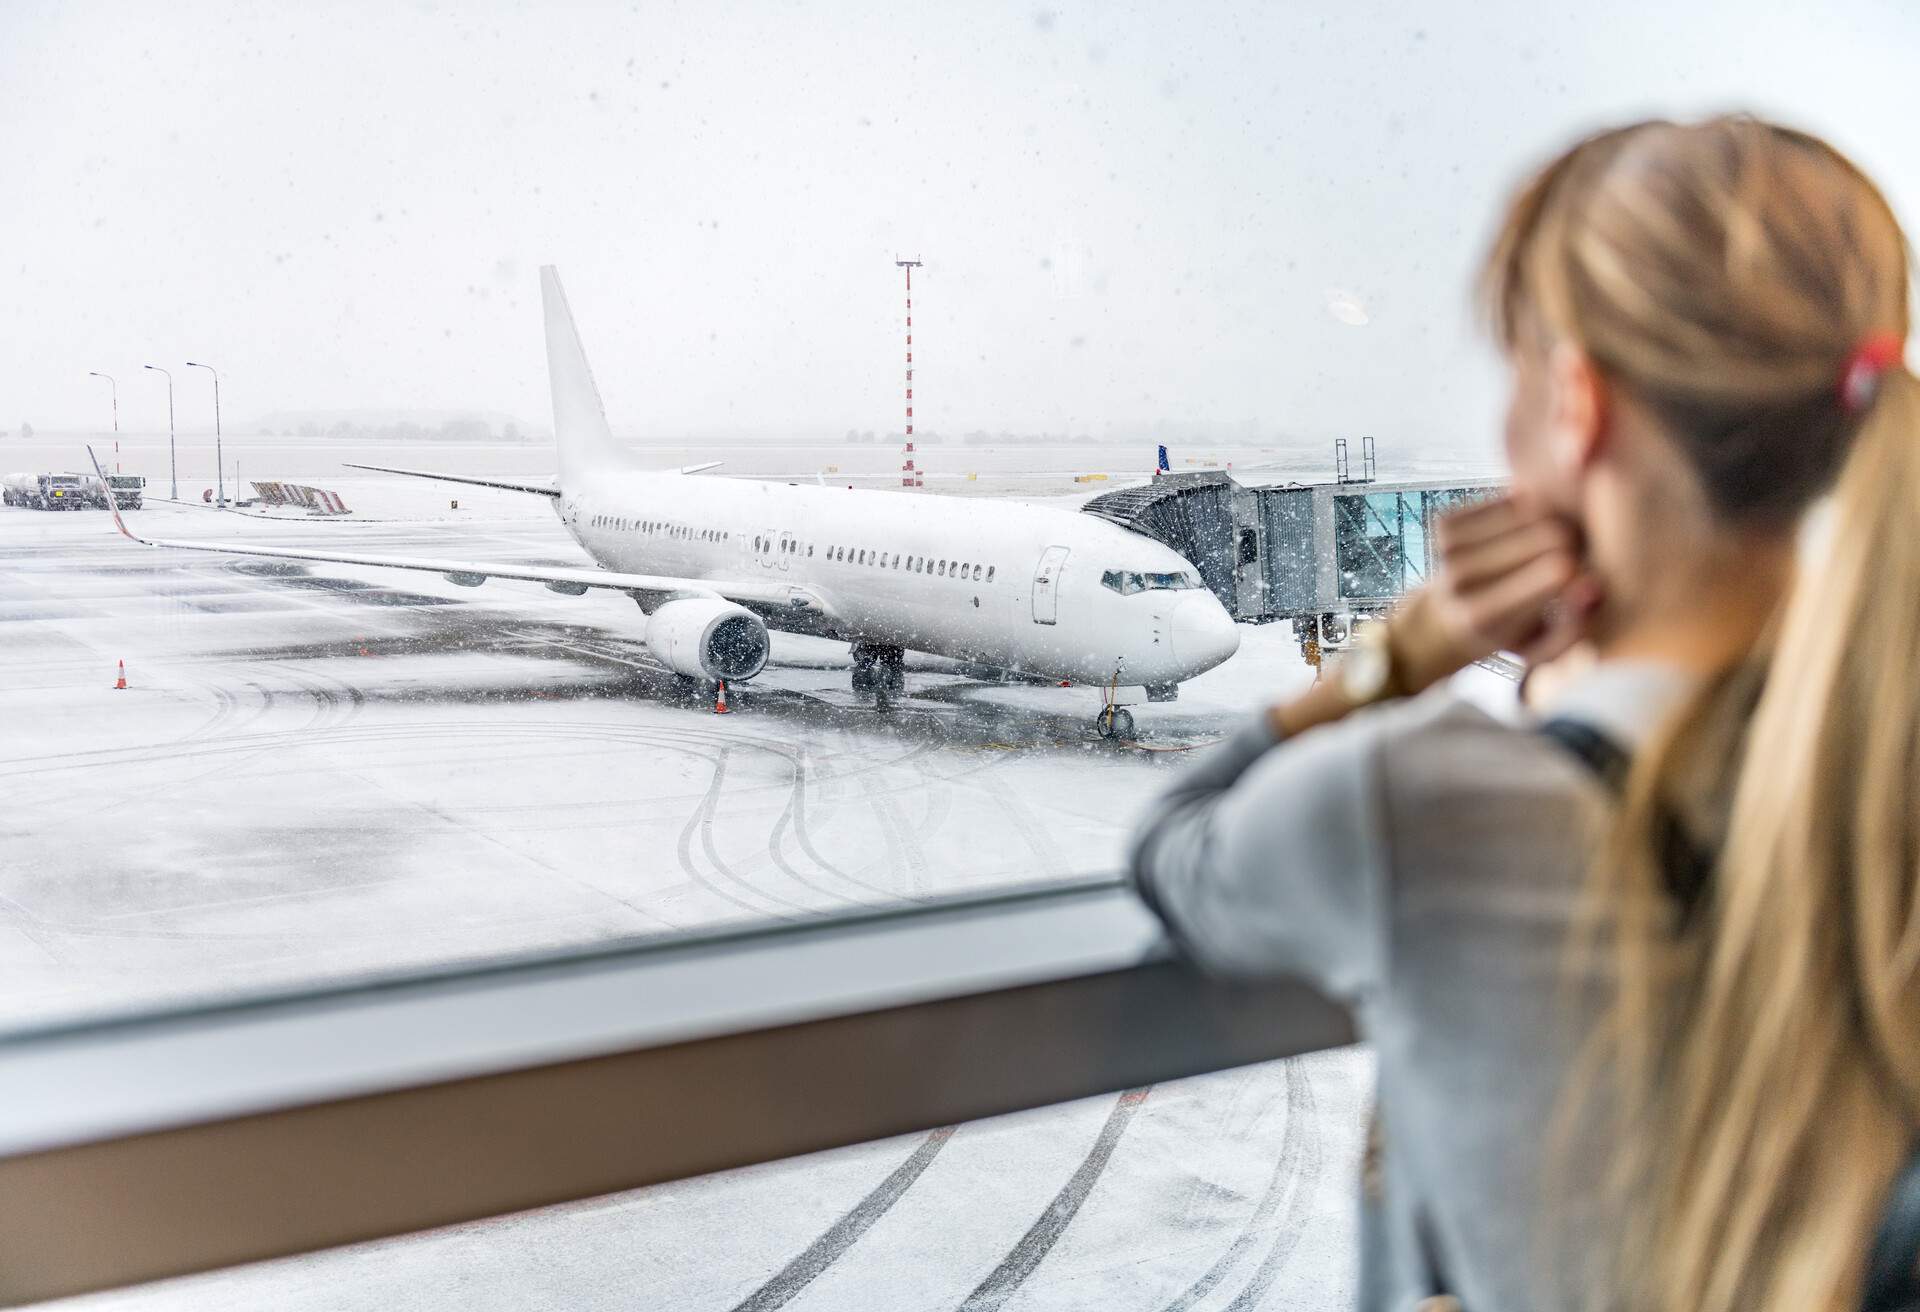 Horizontal color image of airplane during snowstorm and woman looking and waiting for departure.